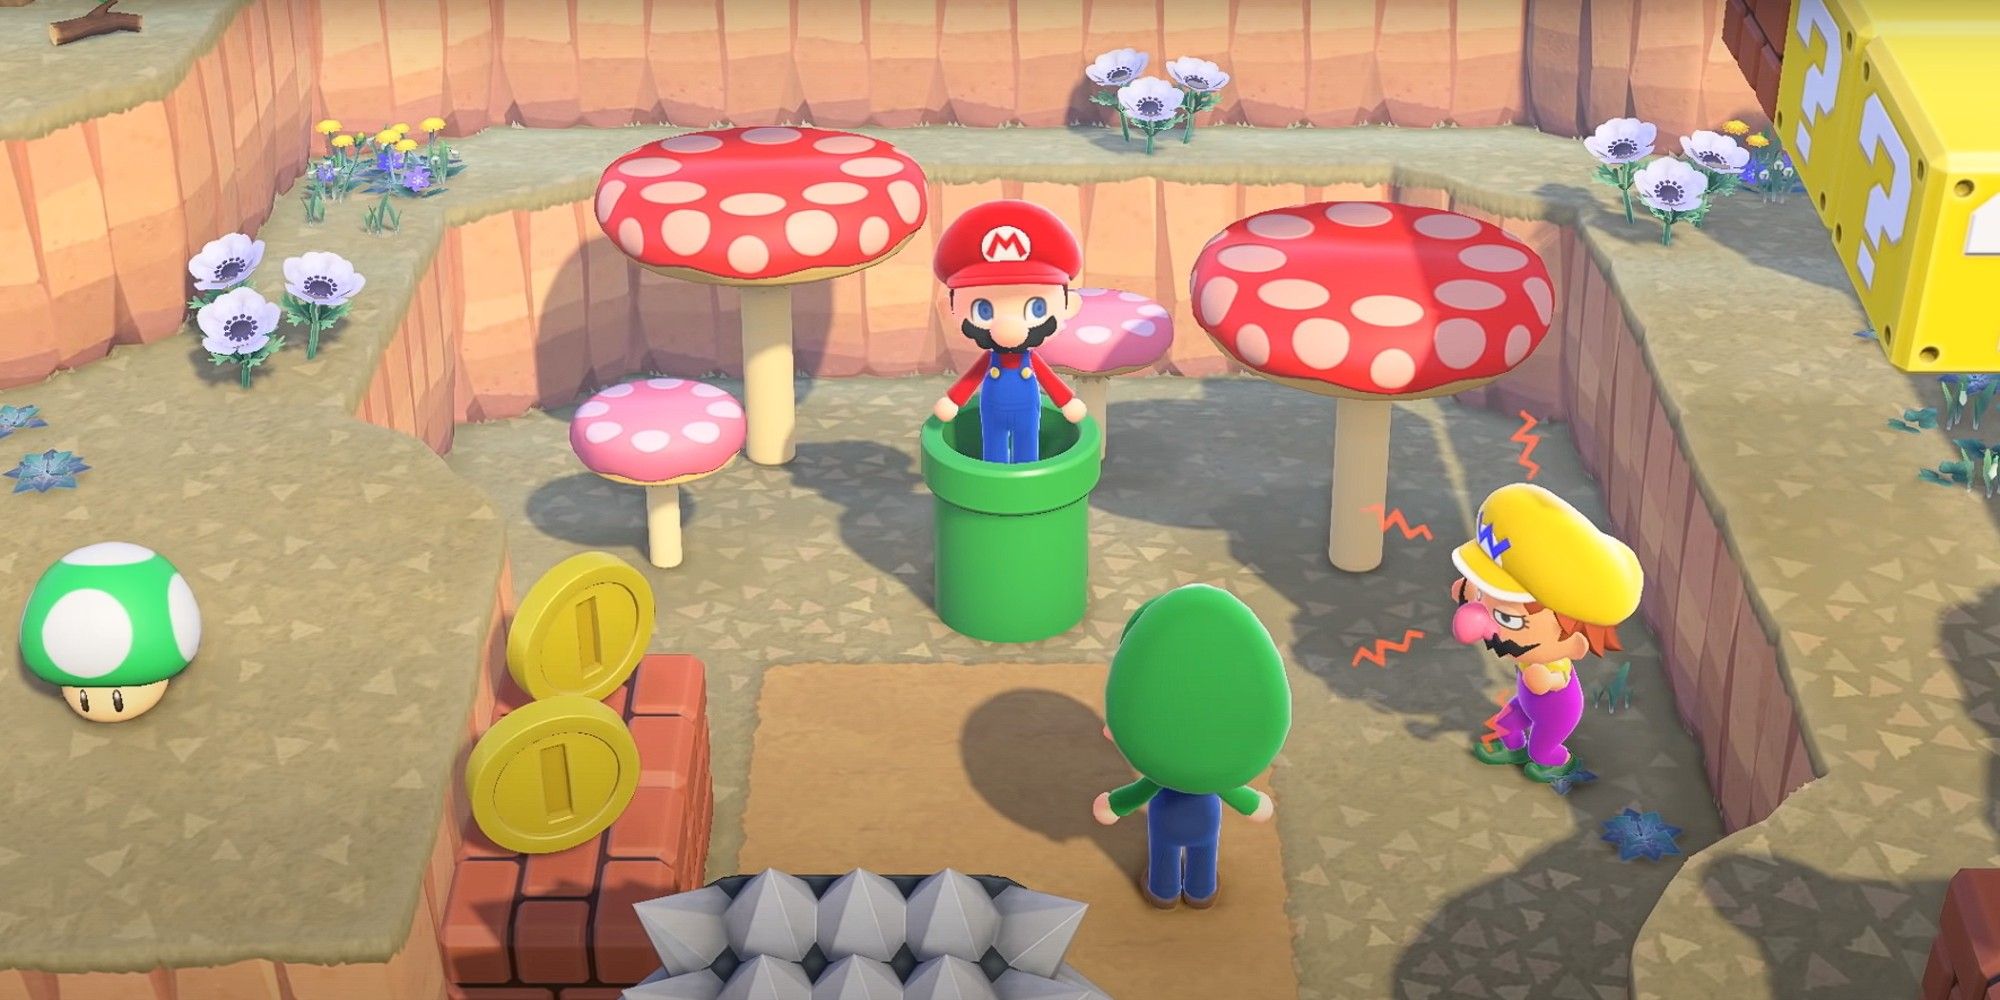 A player wears the Mario costume and uses a warp pipe while surrounded by other Super Mario Bros items in Animal Crossing: New Horizons